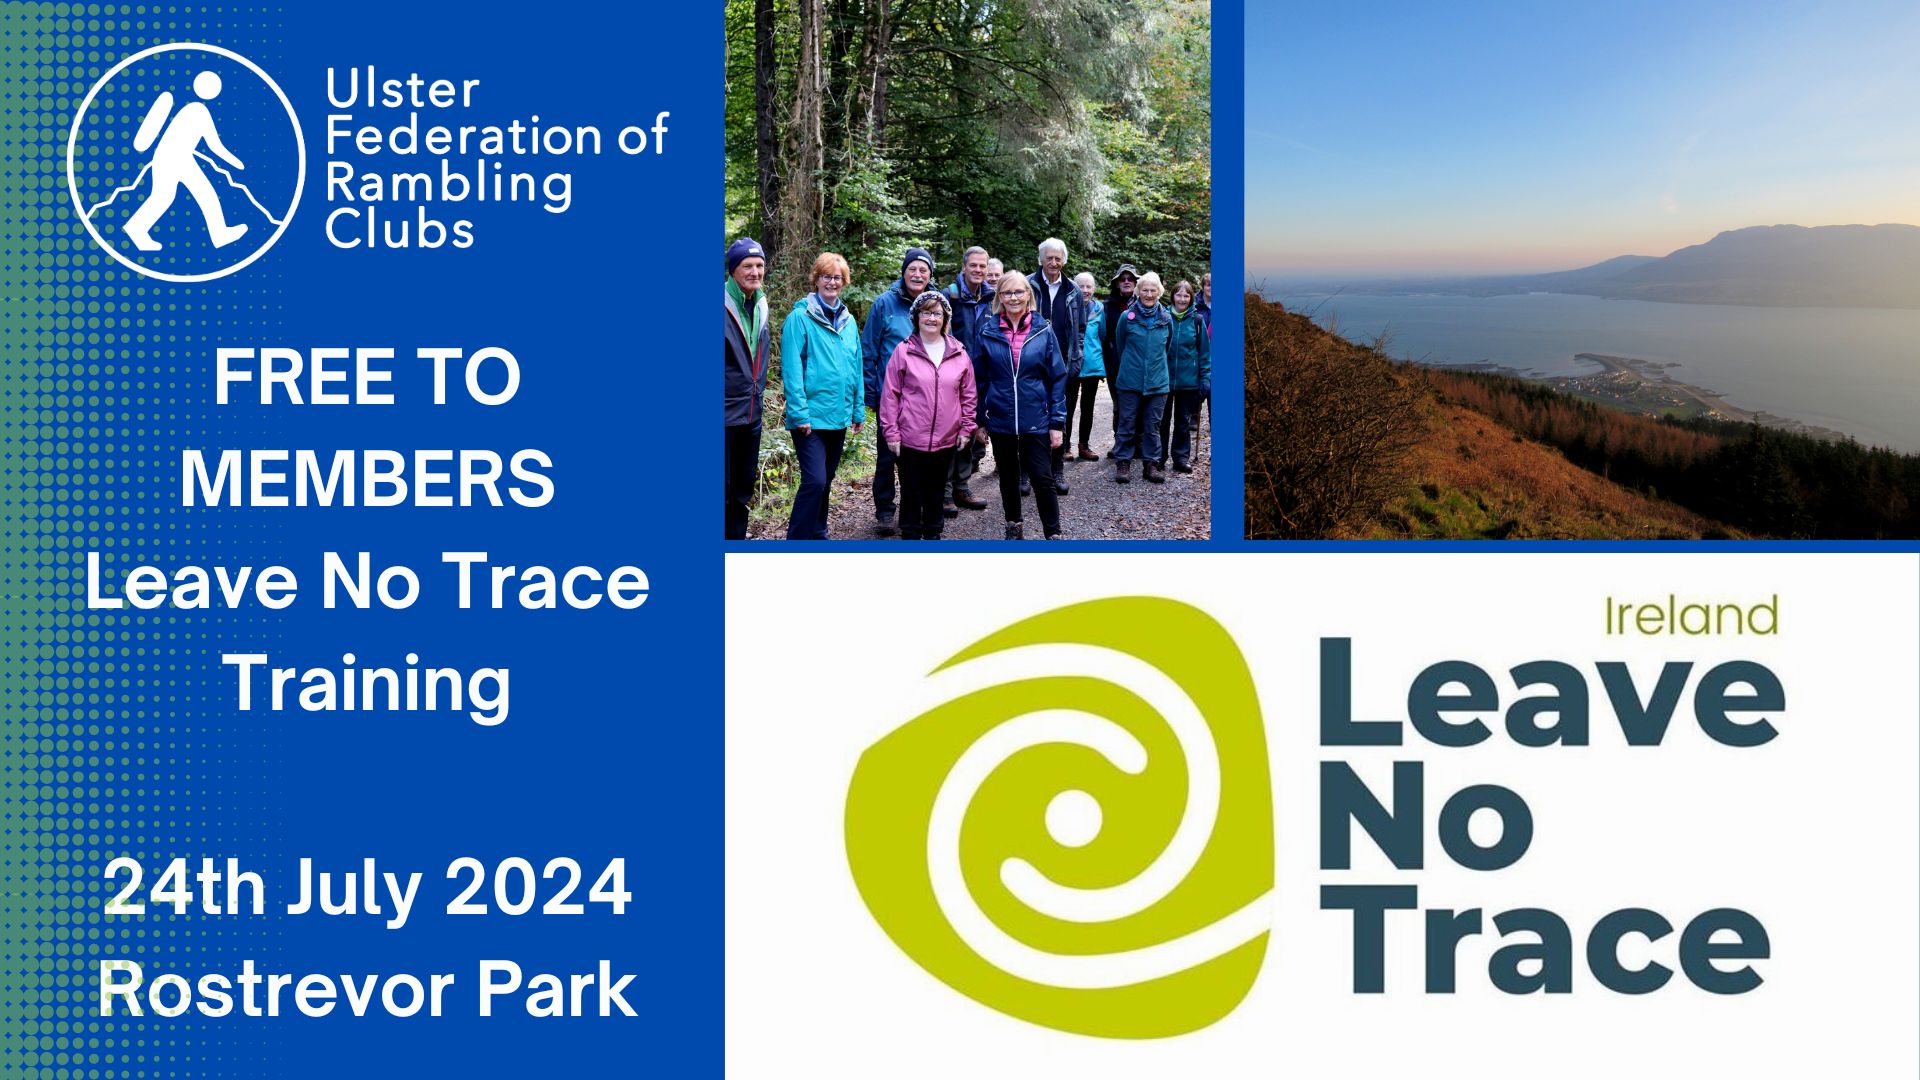 Leave No Trace Training